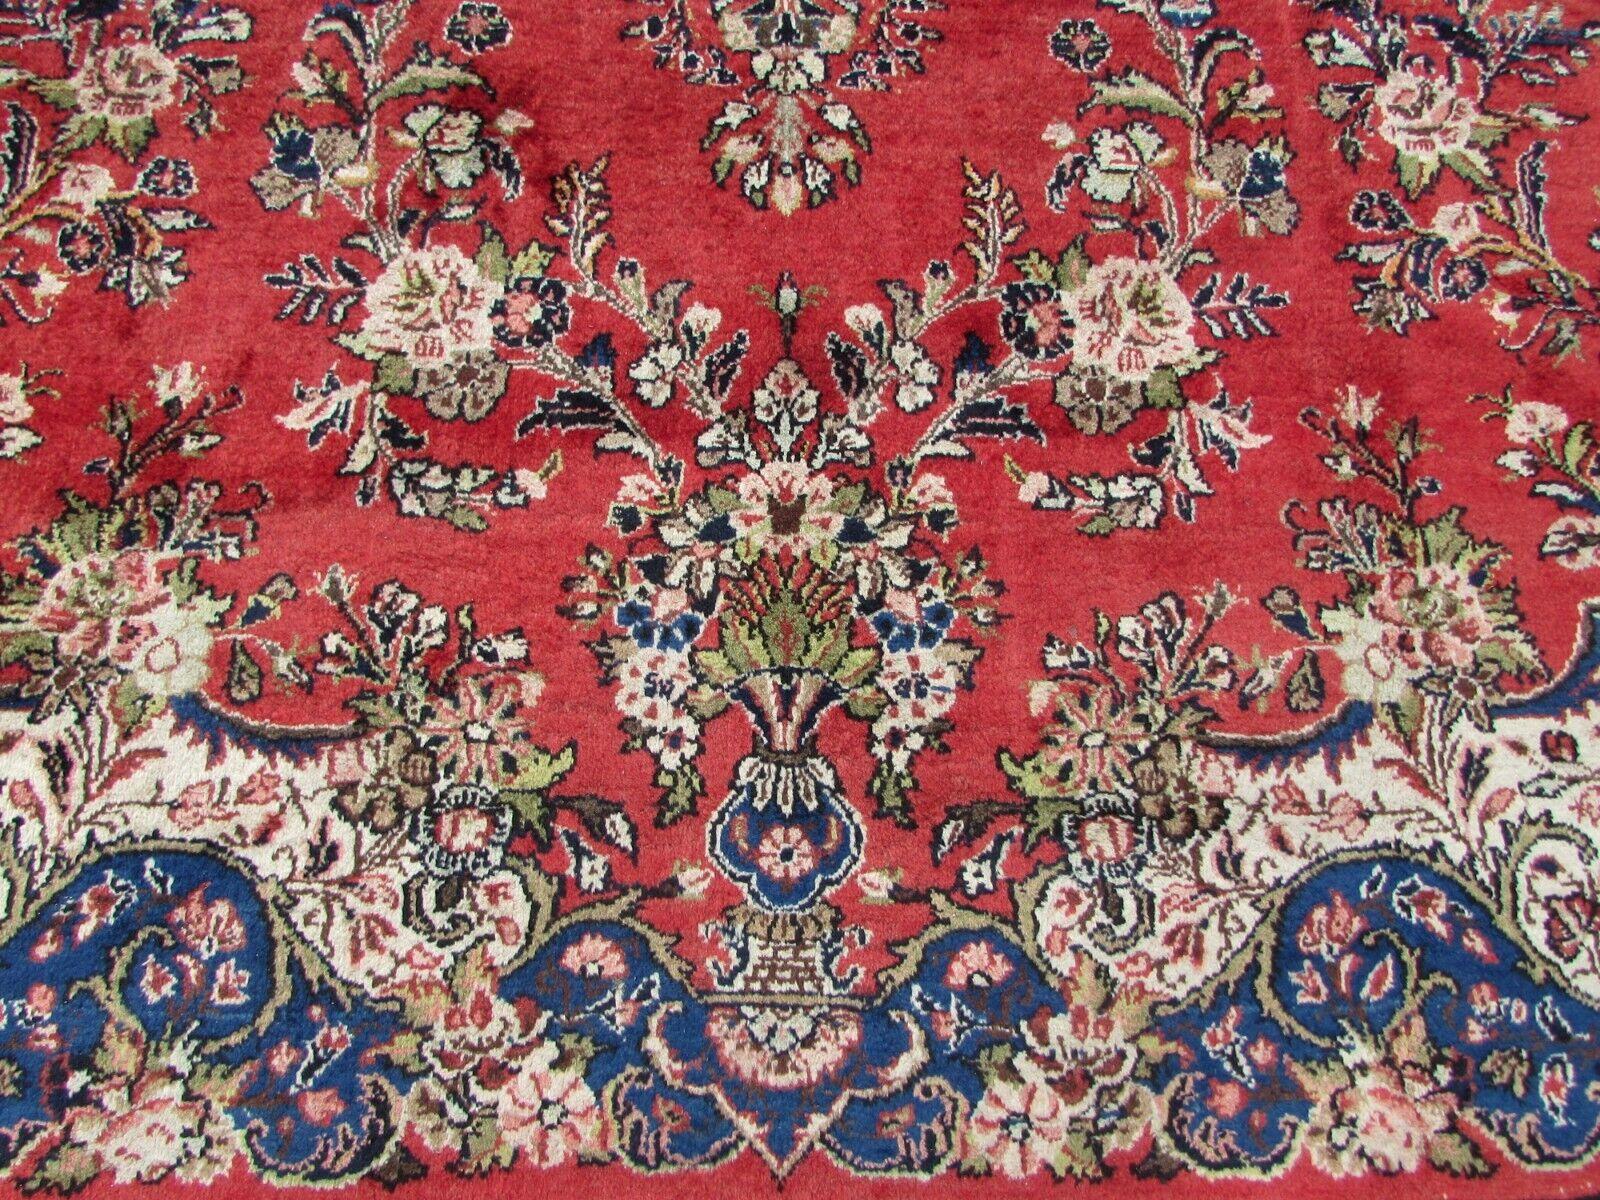 Hand-Knotted Handmade Vintage Persian Style Sarouk Oversize Rug 10.7' x 16.4', 1970s - 1Q72 For Sale